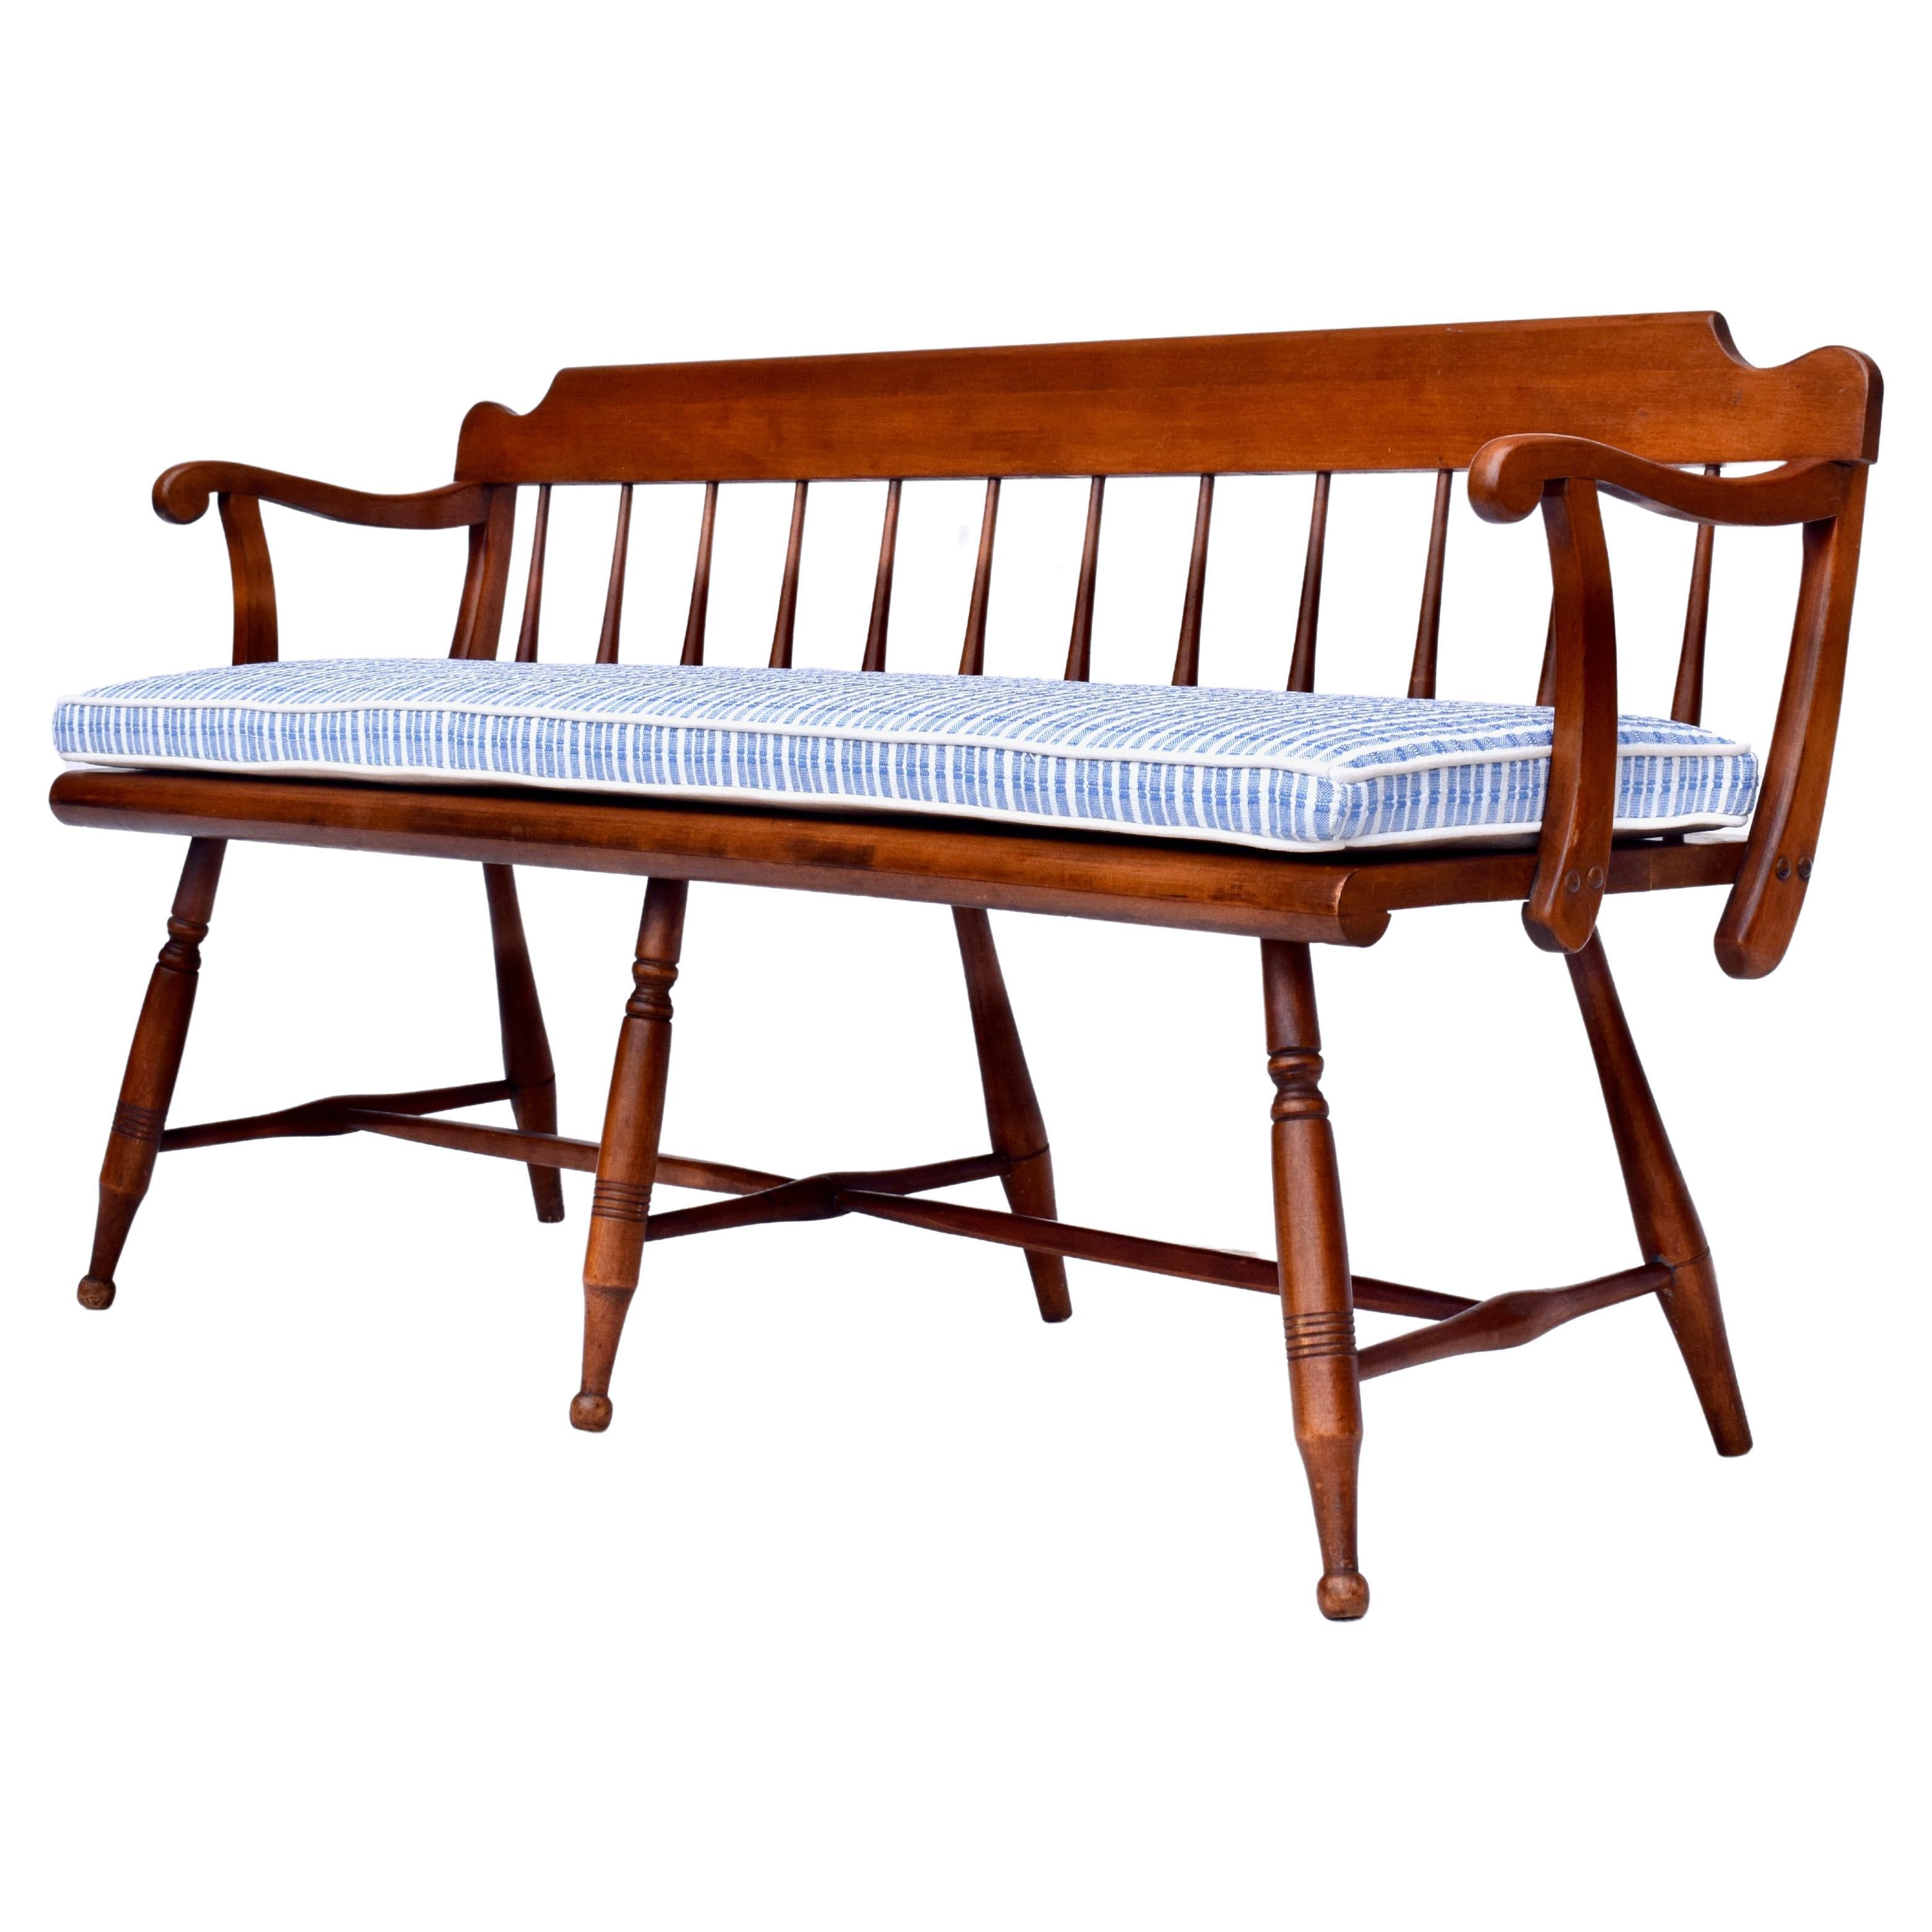 American Farmhouse Windsor Style Maple Spindle Back Bench